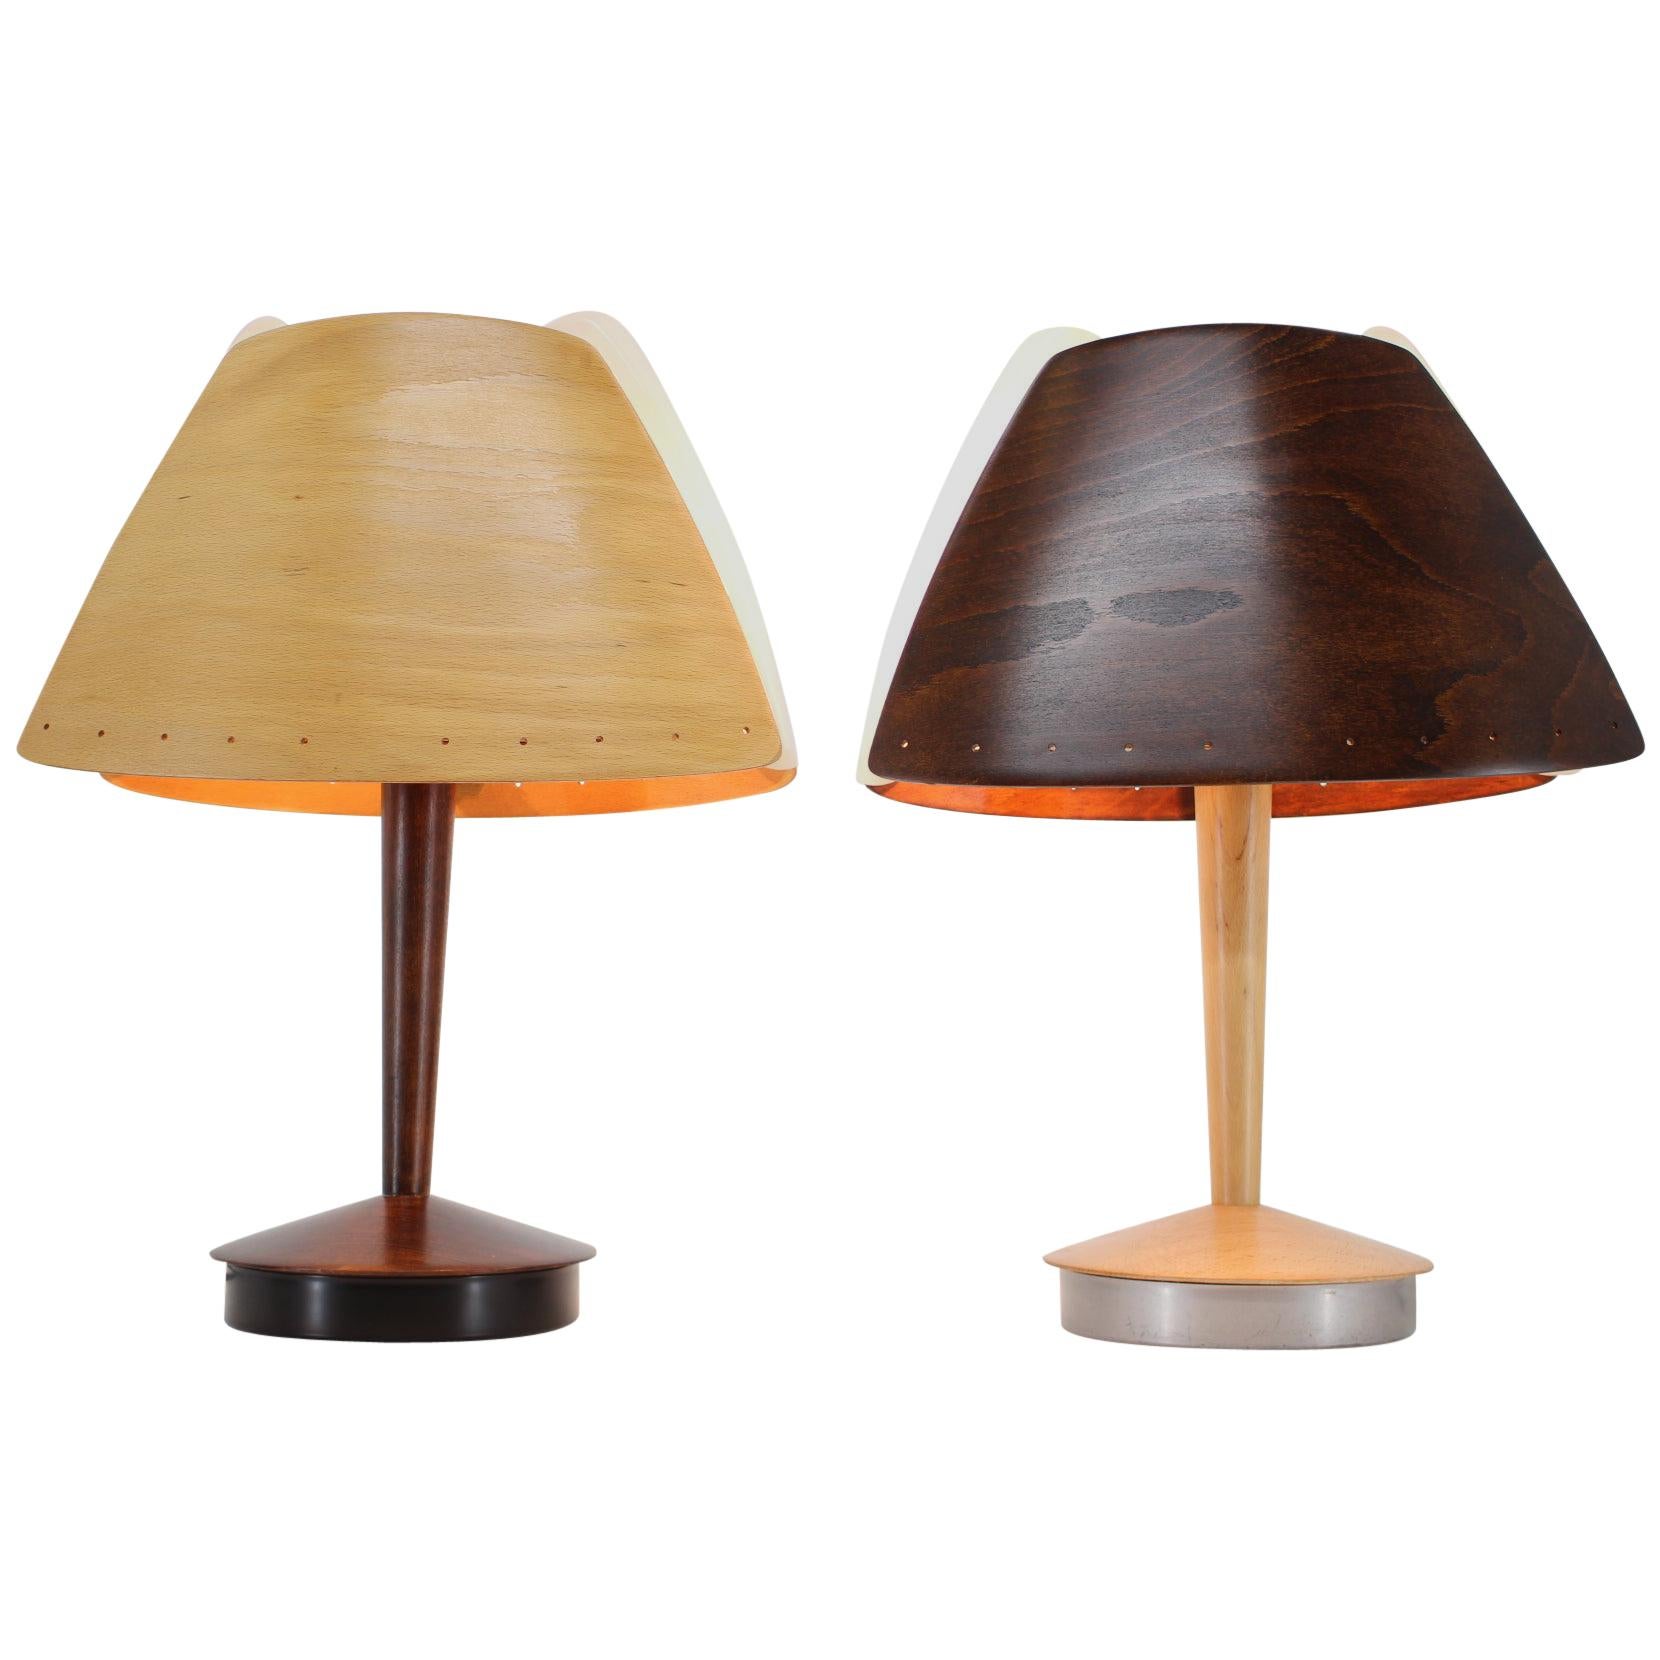 Pair of Midcentury French Design Wooden Table Lamp by Lucid / 1970s, Renovated